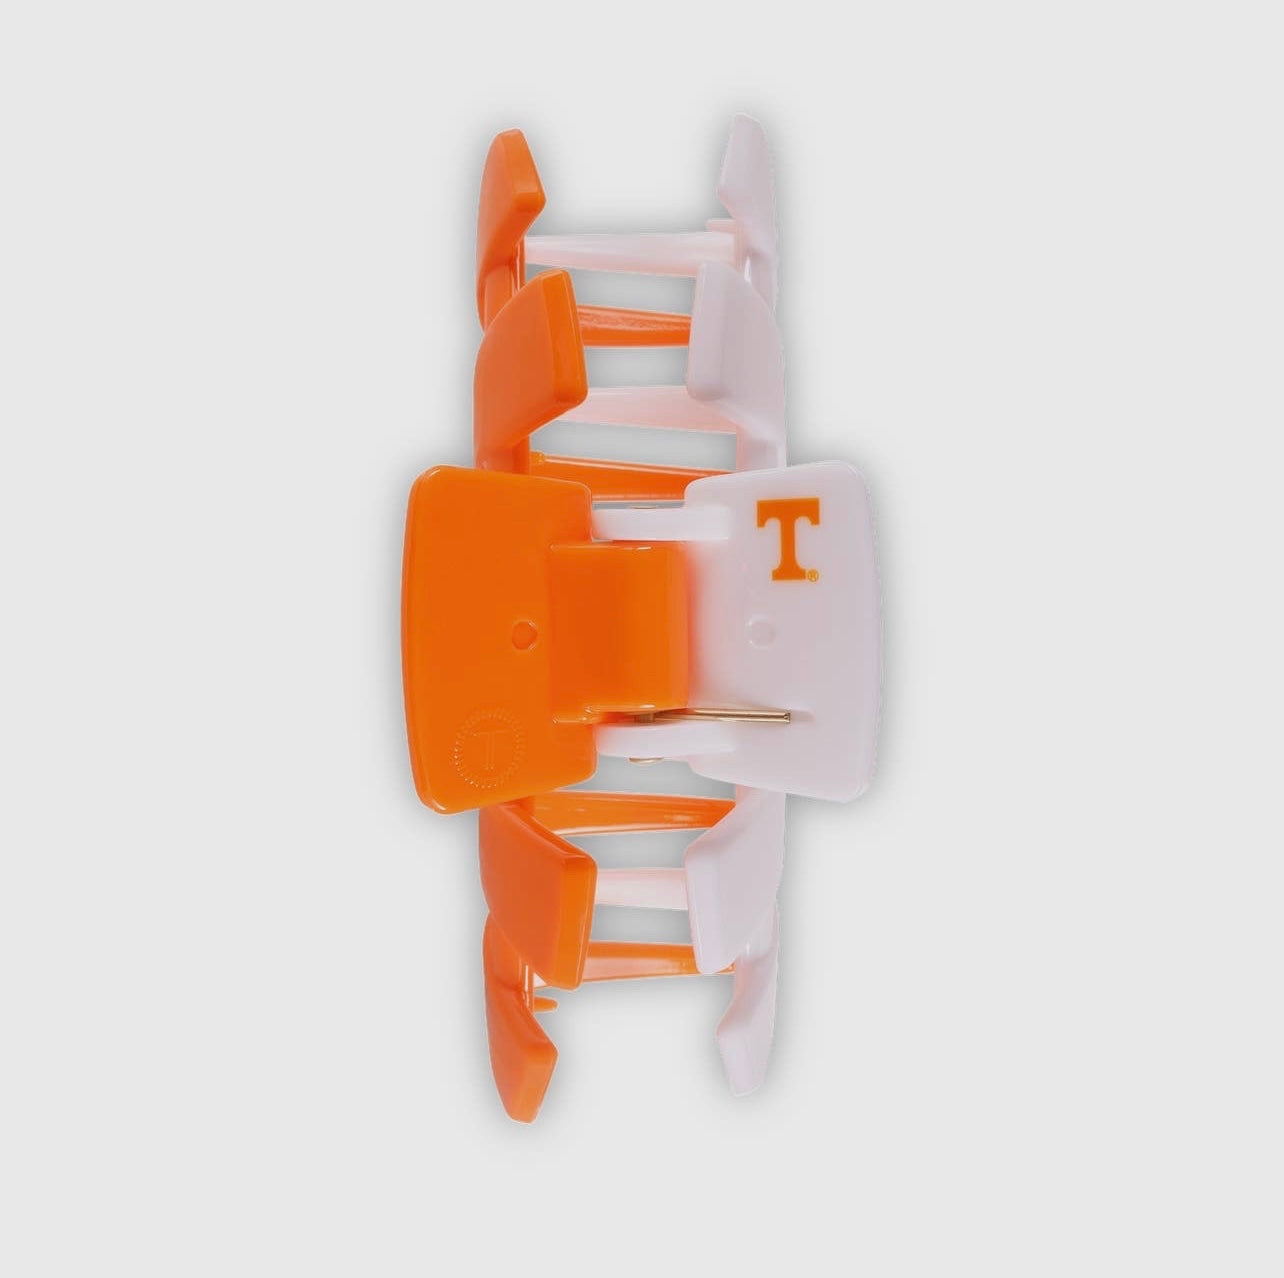 University of Tennessee Collegiate Teletie Claw Clip in orange and white. Top view.